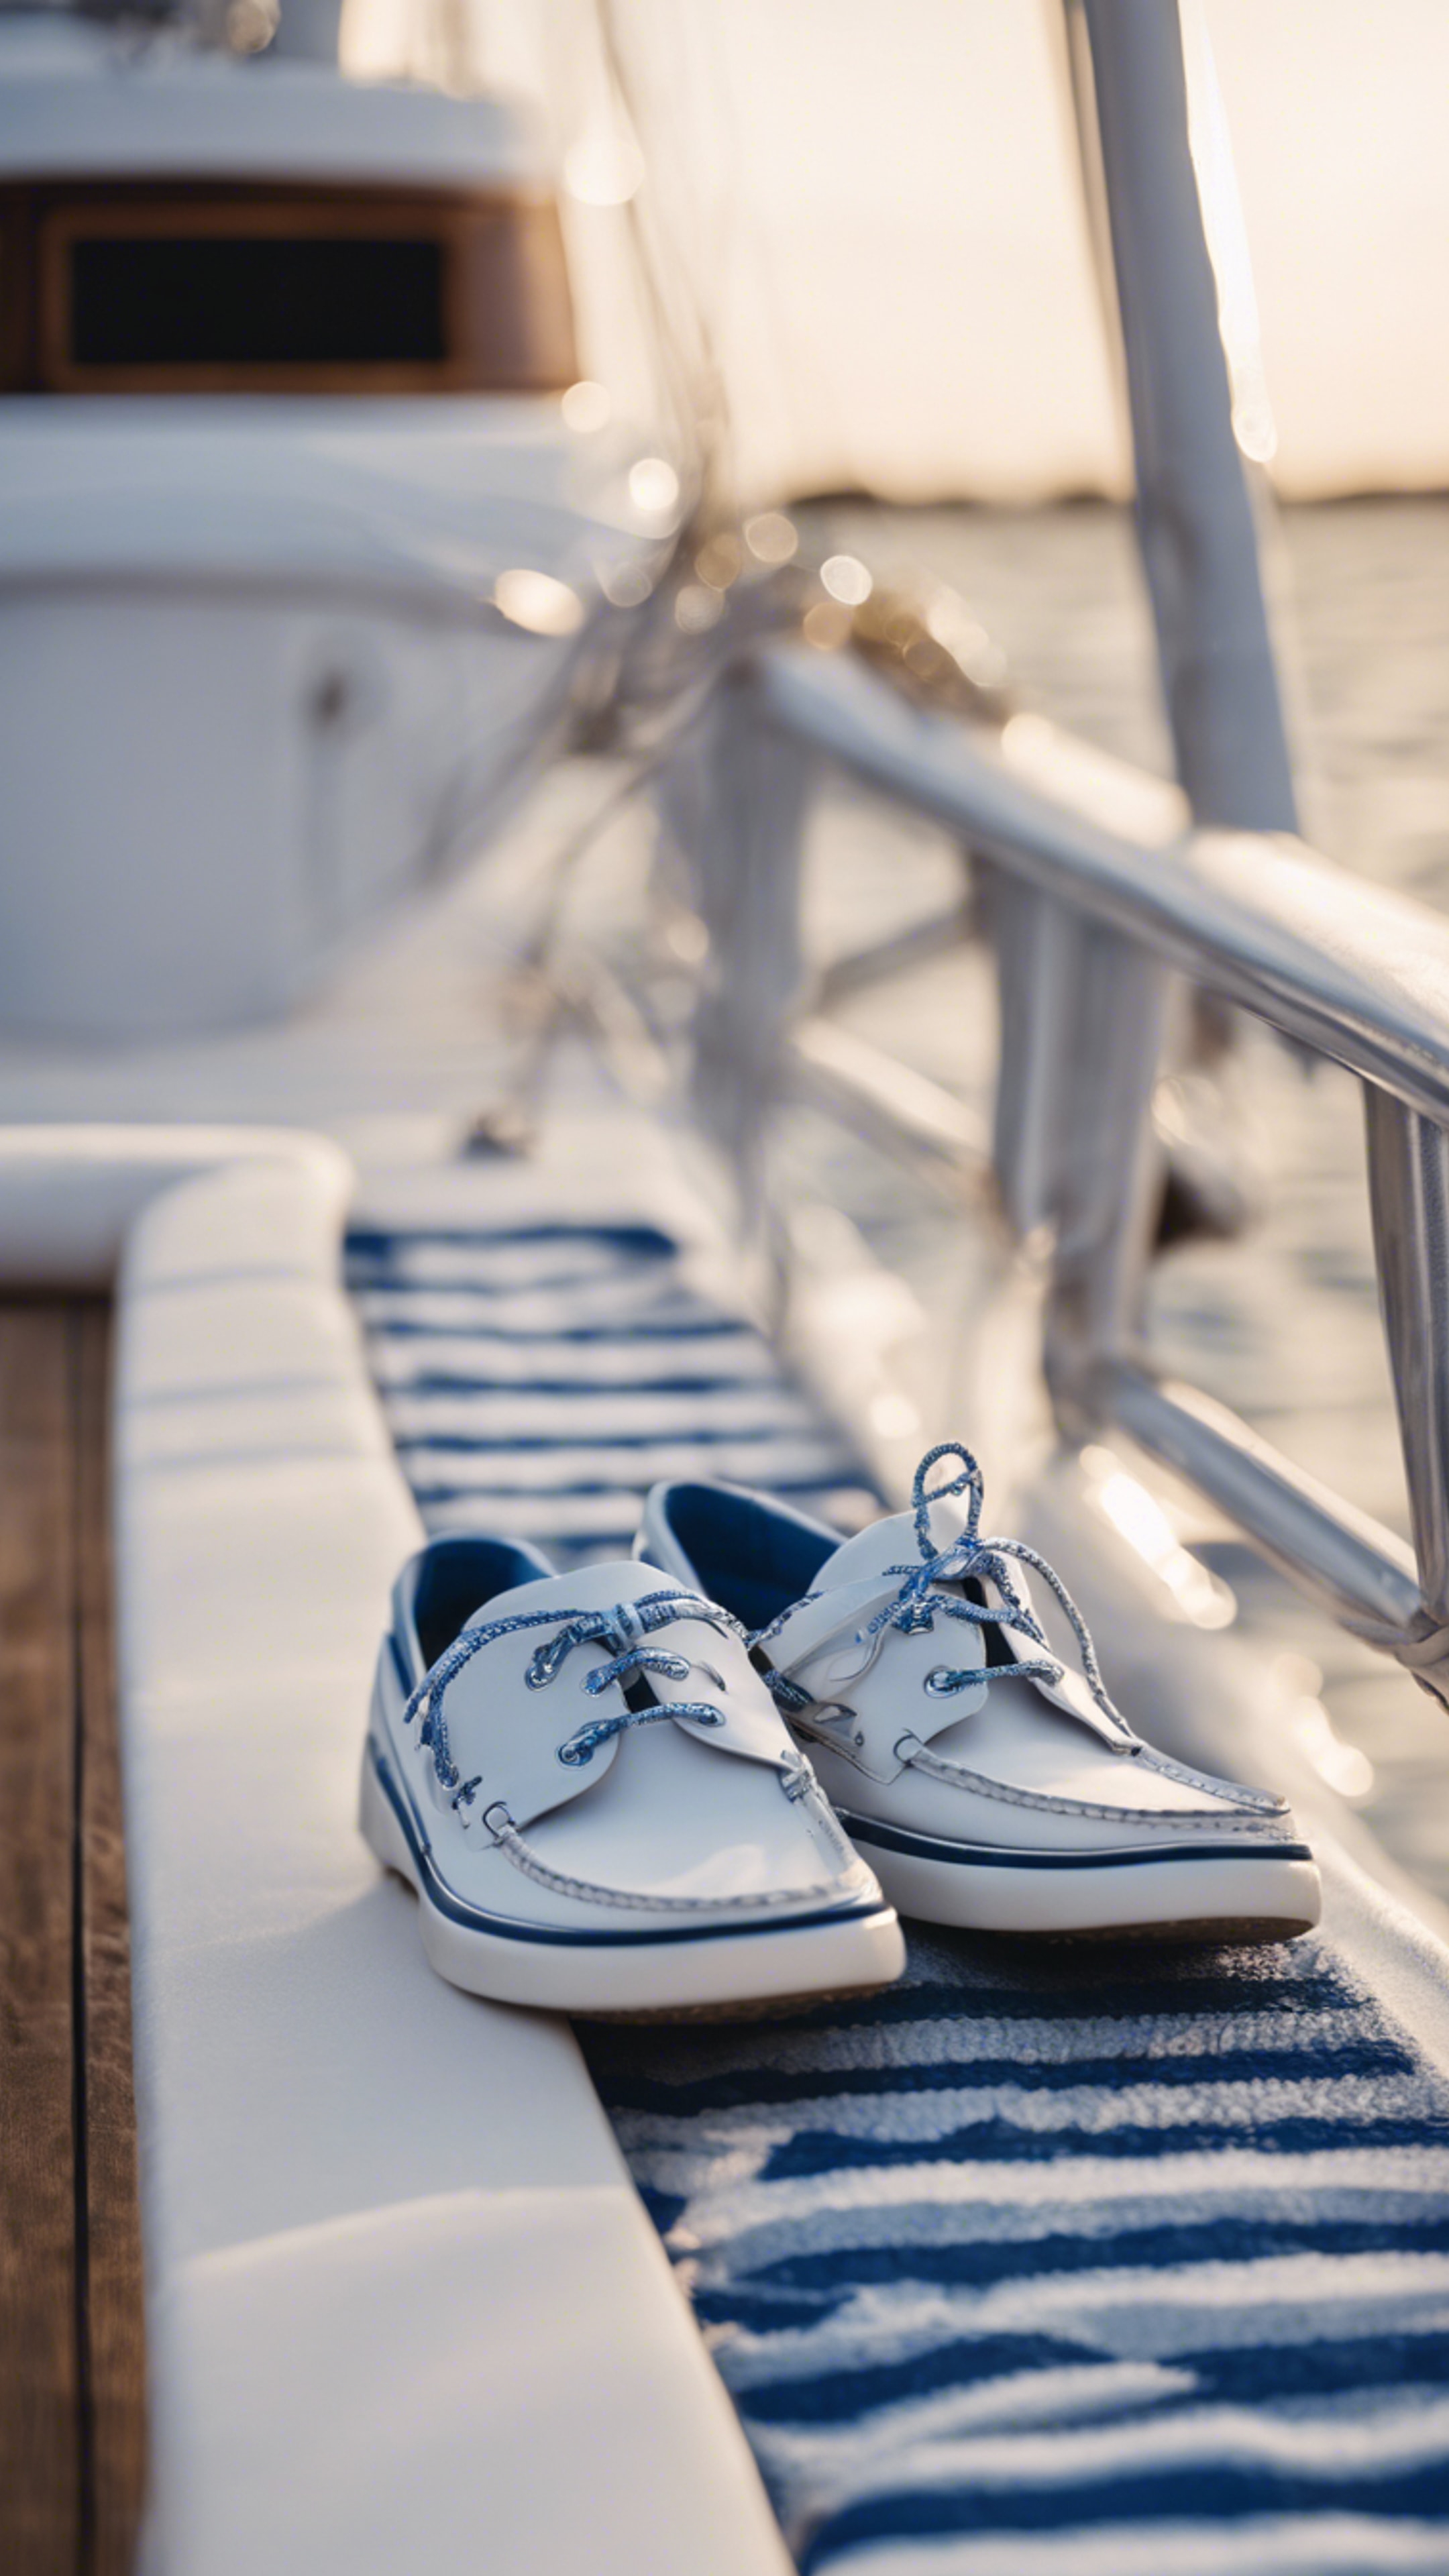 A pair of blue and white boat shoes resting on a yacht deck, reflecting preppy fashion. Tapeet[e5e4a620cbd541dd8bee]